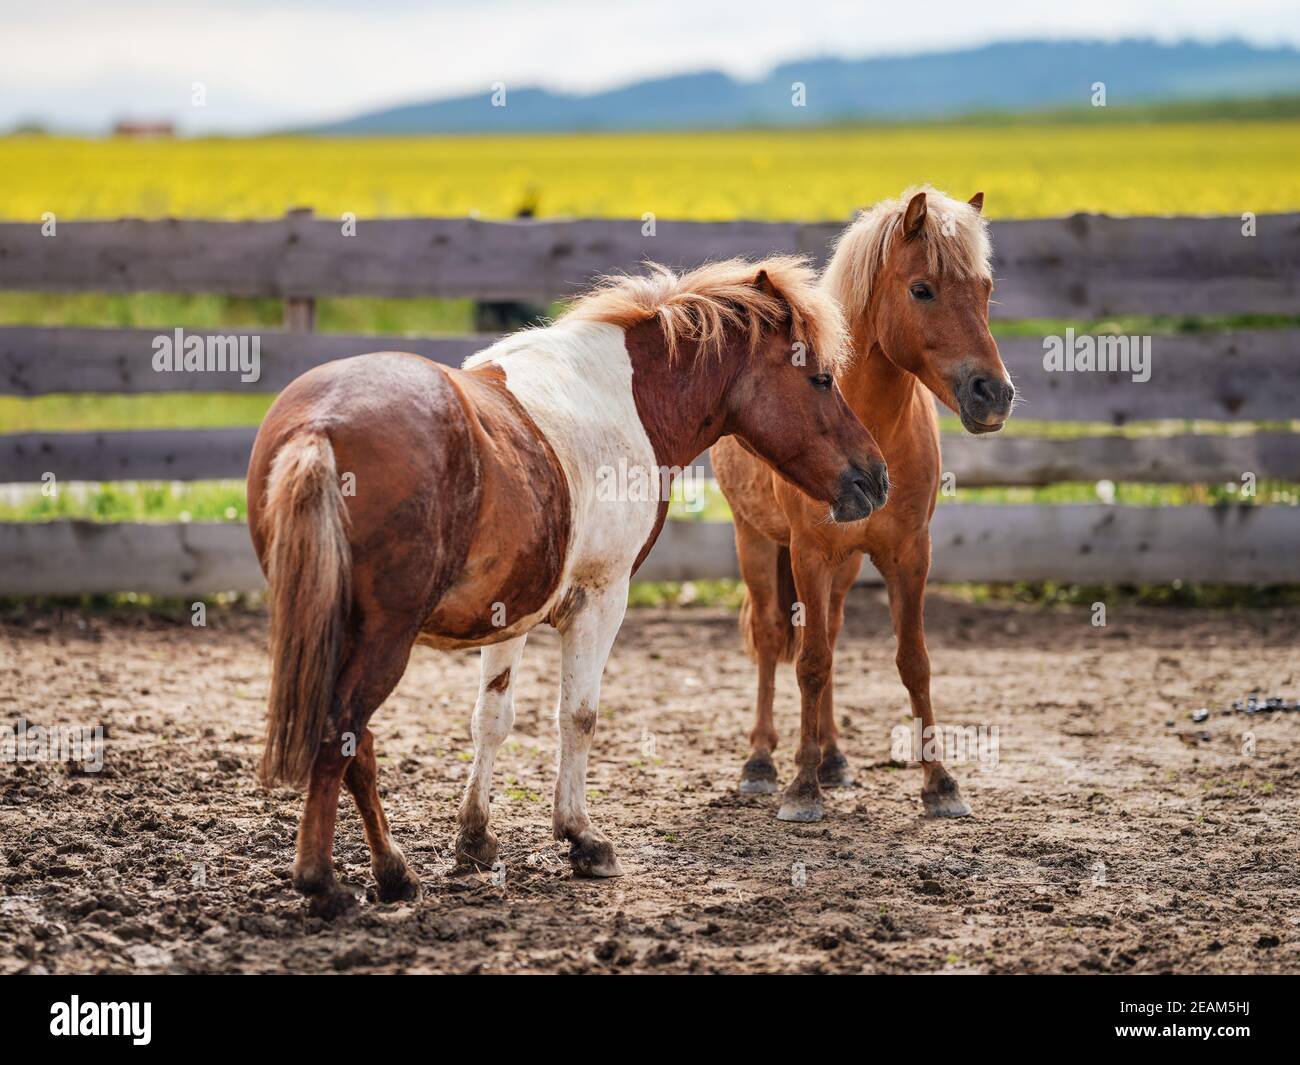 Two small brown and white pony horses on muddy ground, blurred yellow field background Stock Photo